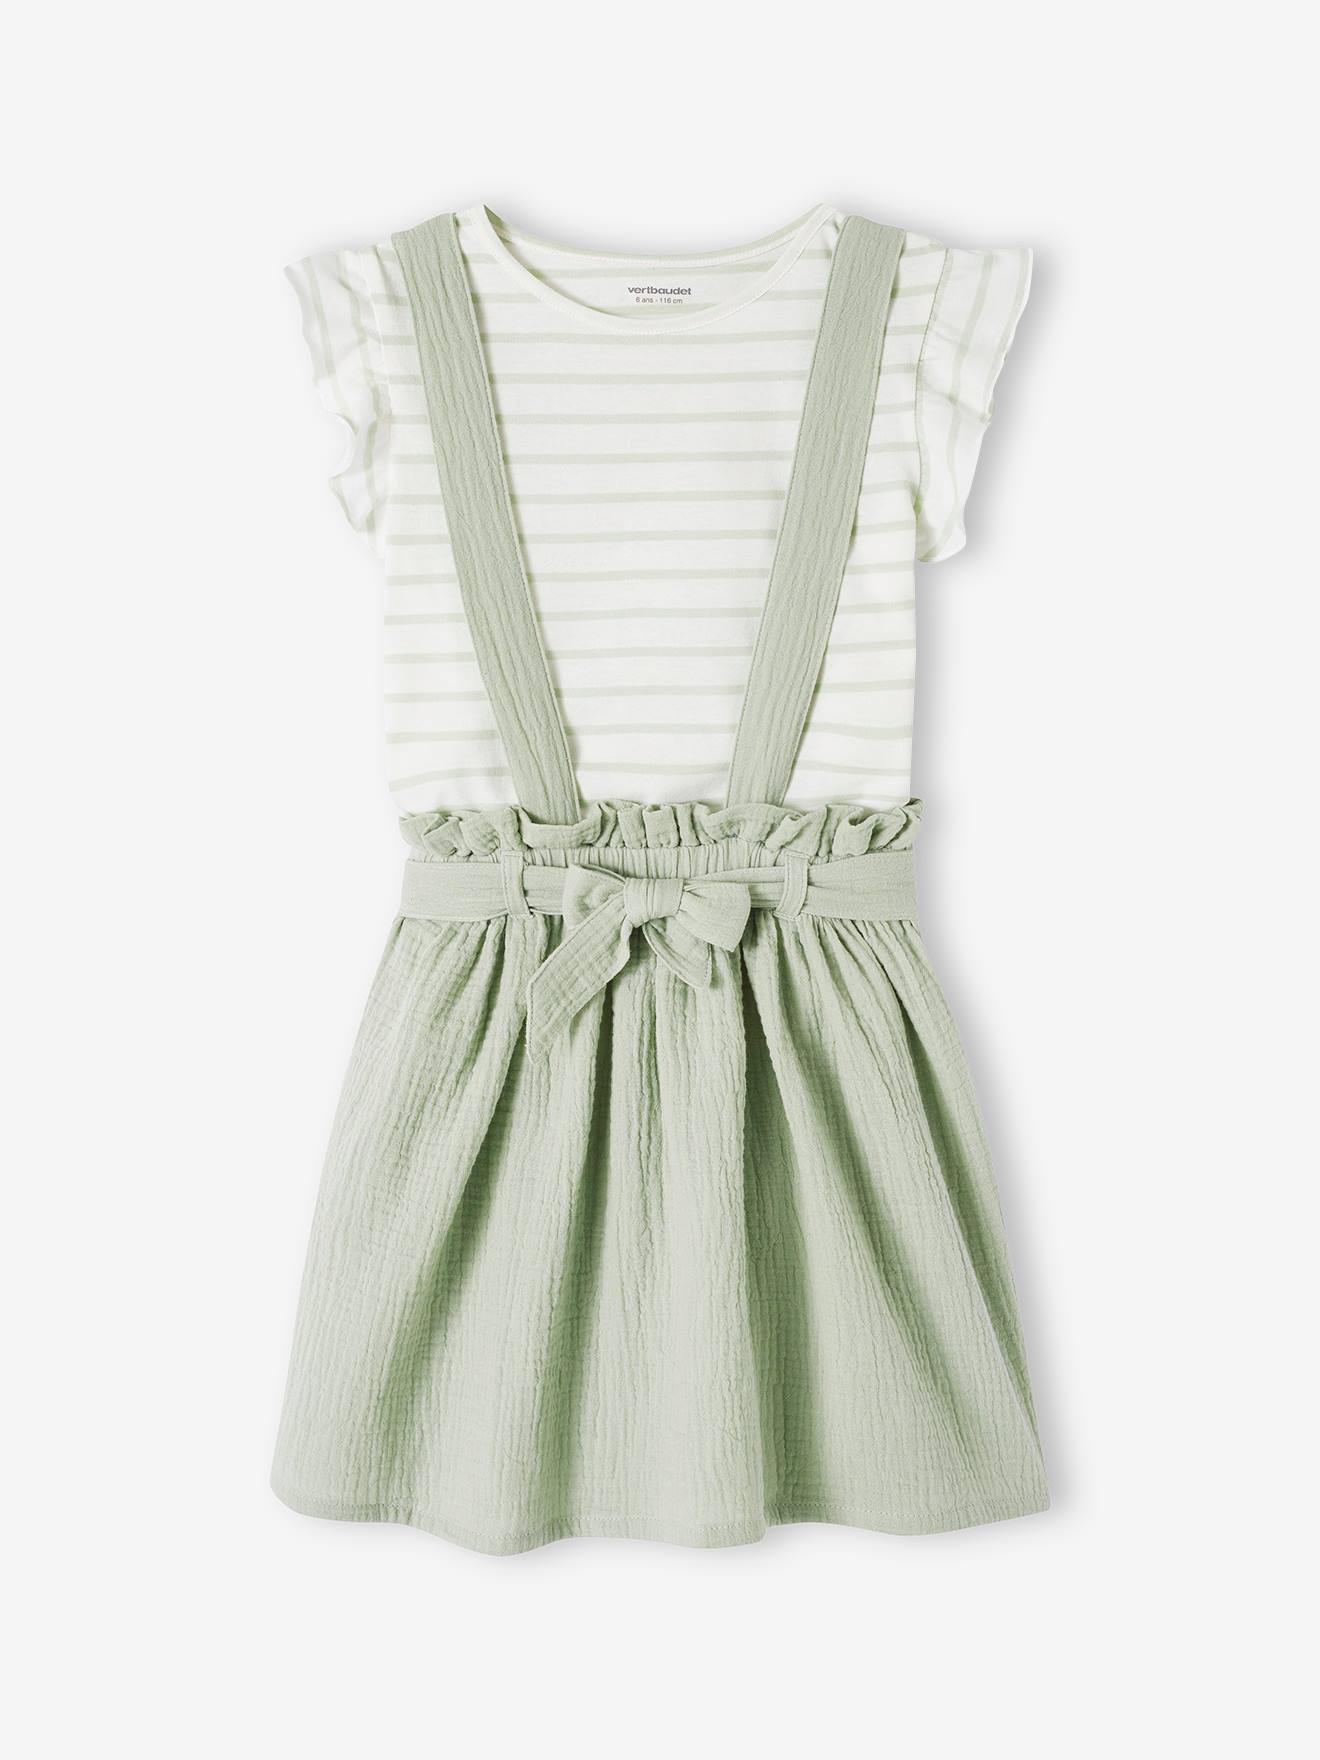 Striped T-Shirt + Cotton Gauze Skirt Outfit, for Girls sage green